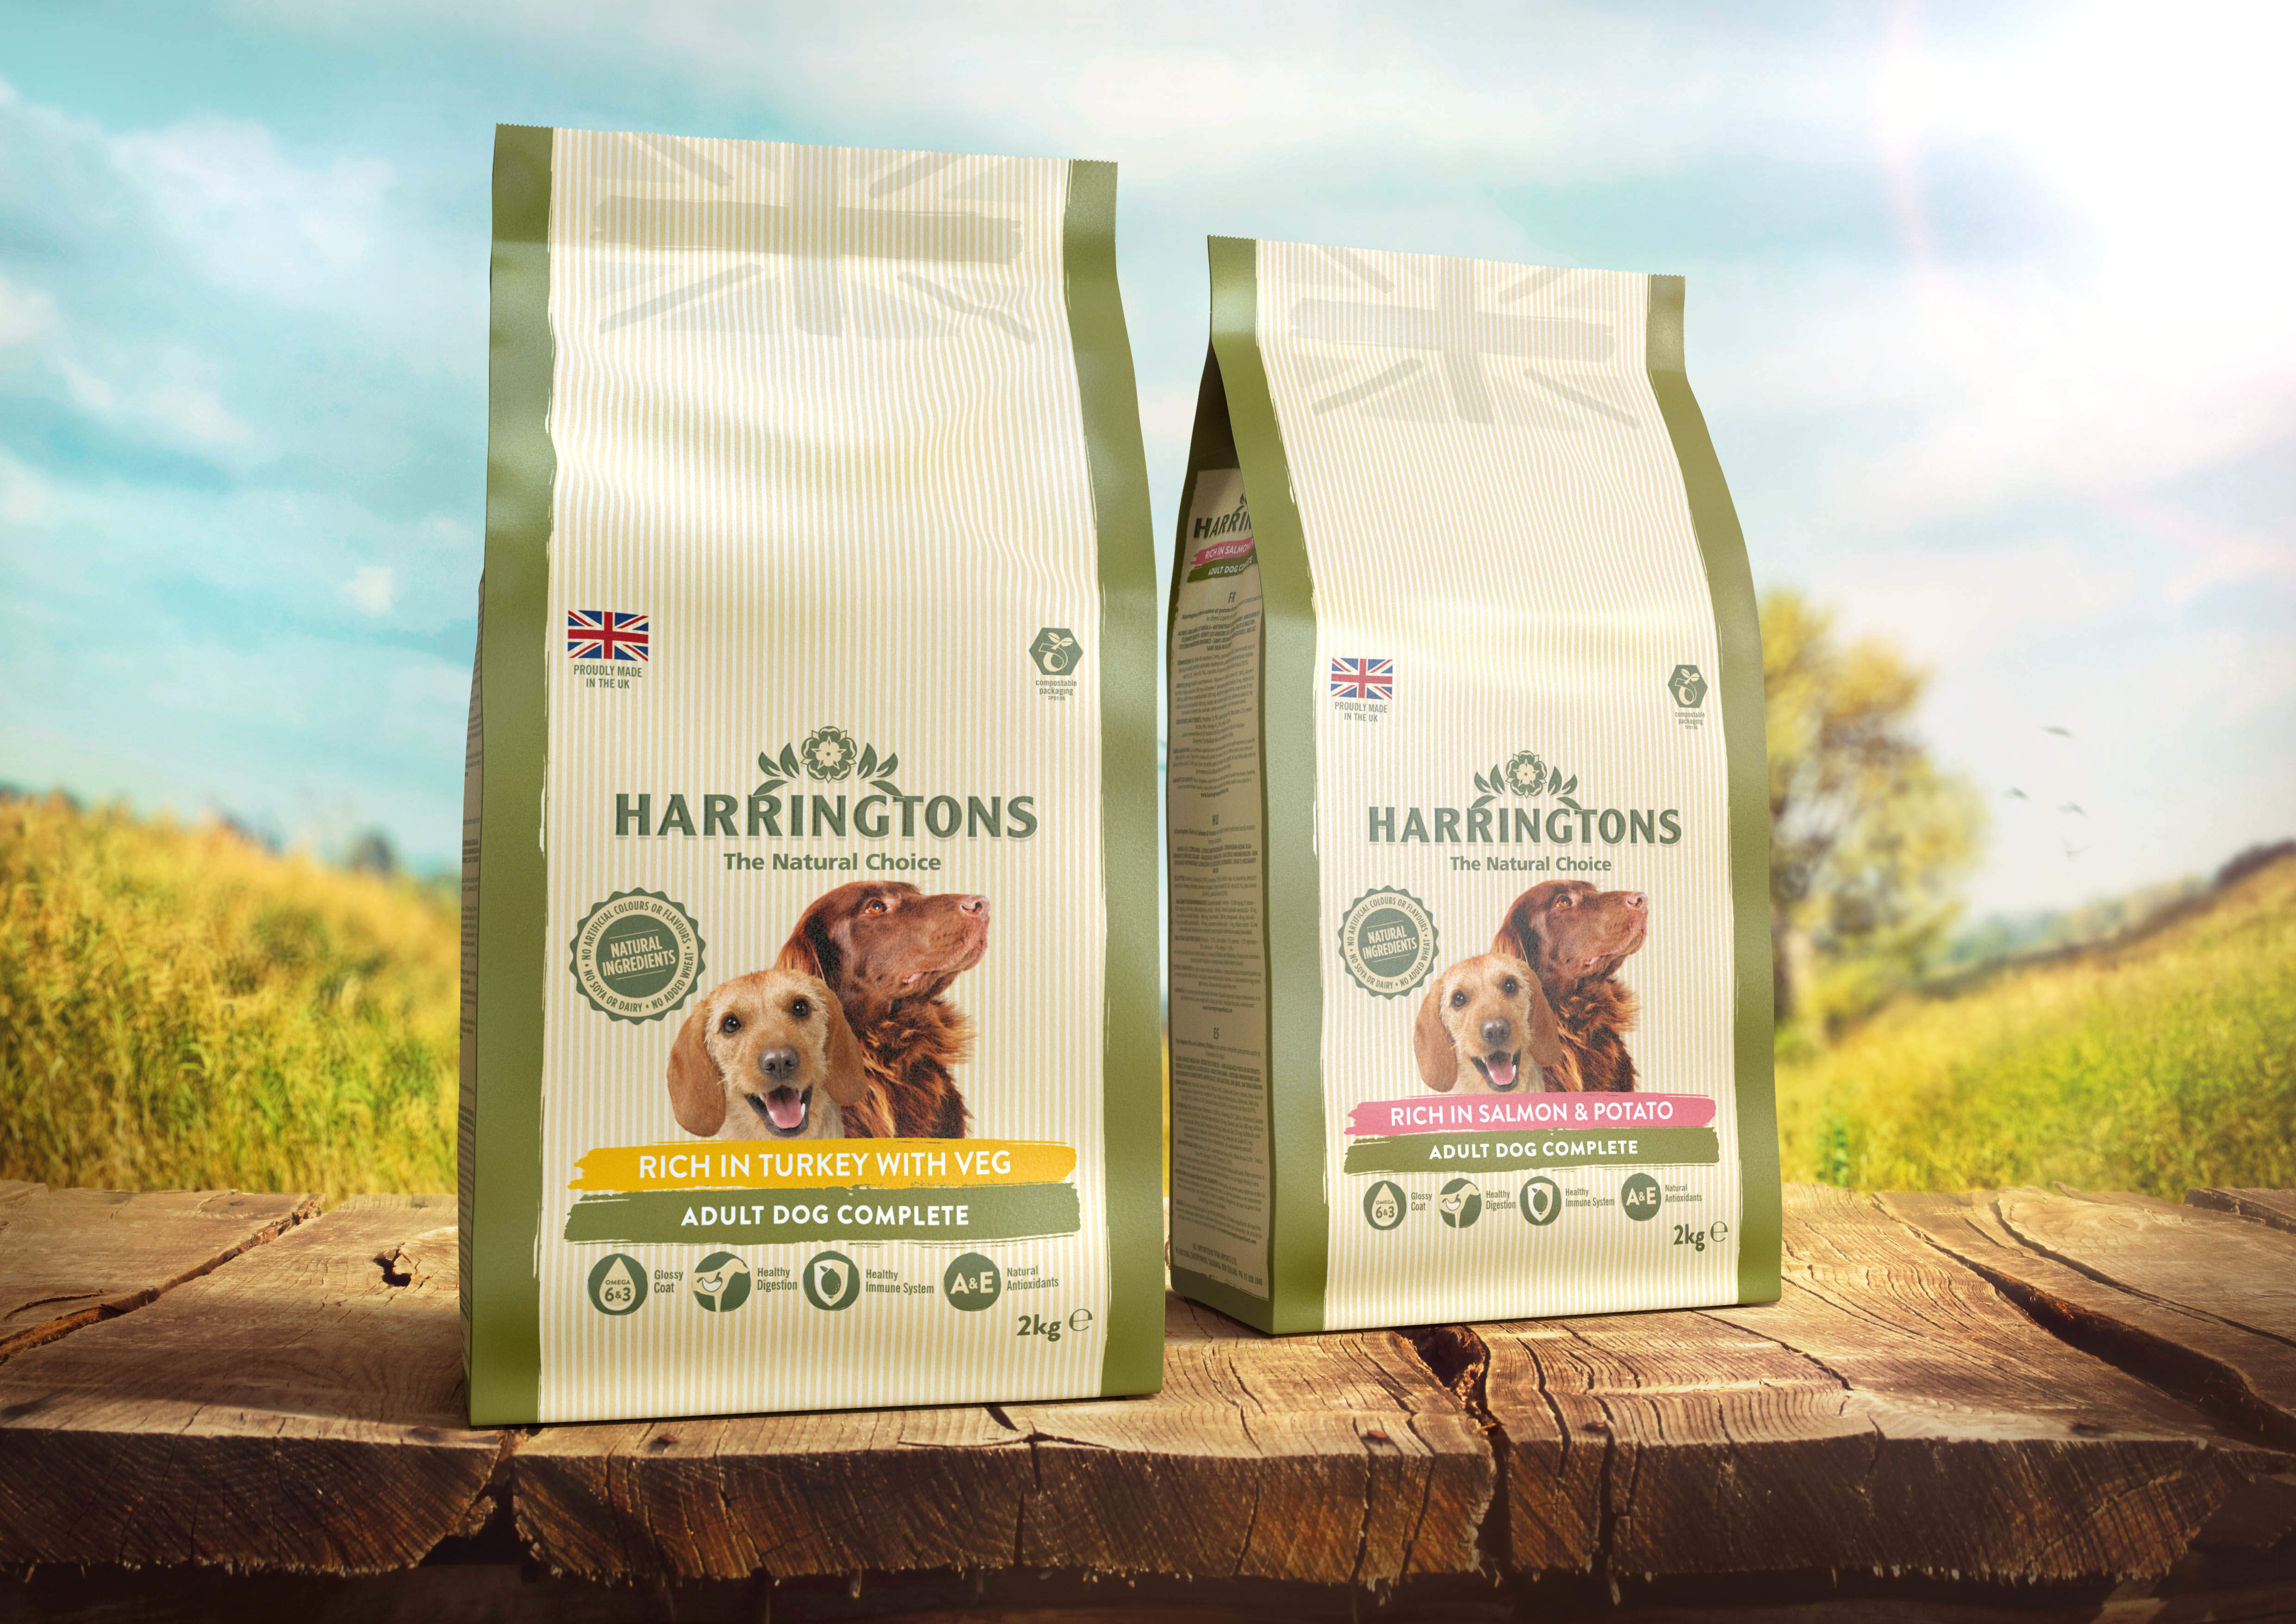 Harringtons dog food launches new crafted look packaging, with design by Hornall Anderson